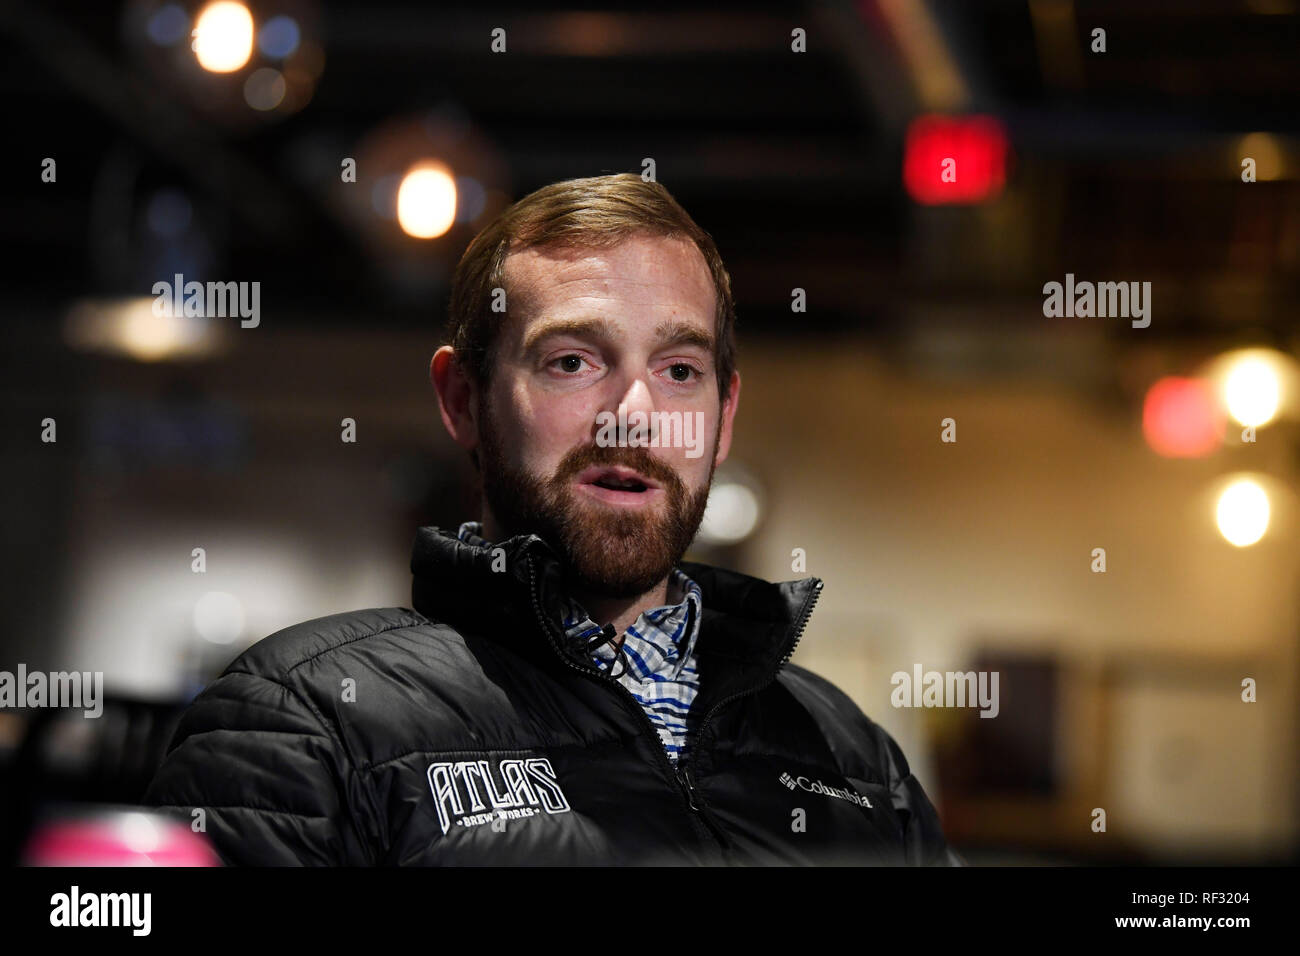 (190123) -- WASHINGTON, Jan. 23, 2019 (Xinhua) -- Justin Cox, owner of a craft brewing business, is interviewed in Ivy City in northeastern Washington, DC, the United States, Jan. 17, 2019. Located in the community of Ivy City in northeastern Washington, DC, Justin Cox's 12-feet-tall (around 3.66 meters tall) brewery has 14 production tanks, with a strong hop aroma filling the air. His craft brewing business has been running smoothly for over five years until just recently. Without approved labels from the federal government, kegs of apricot-flavored India Pale Ale (IPA) have piled up in his Stock Photo